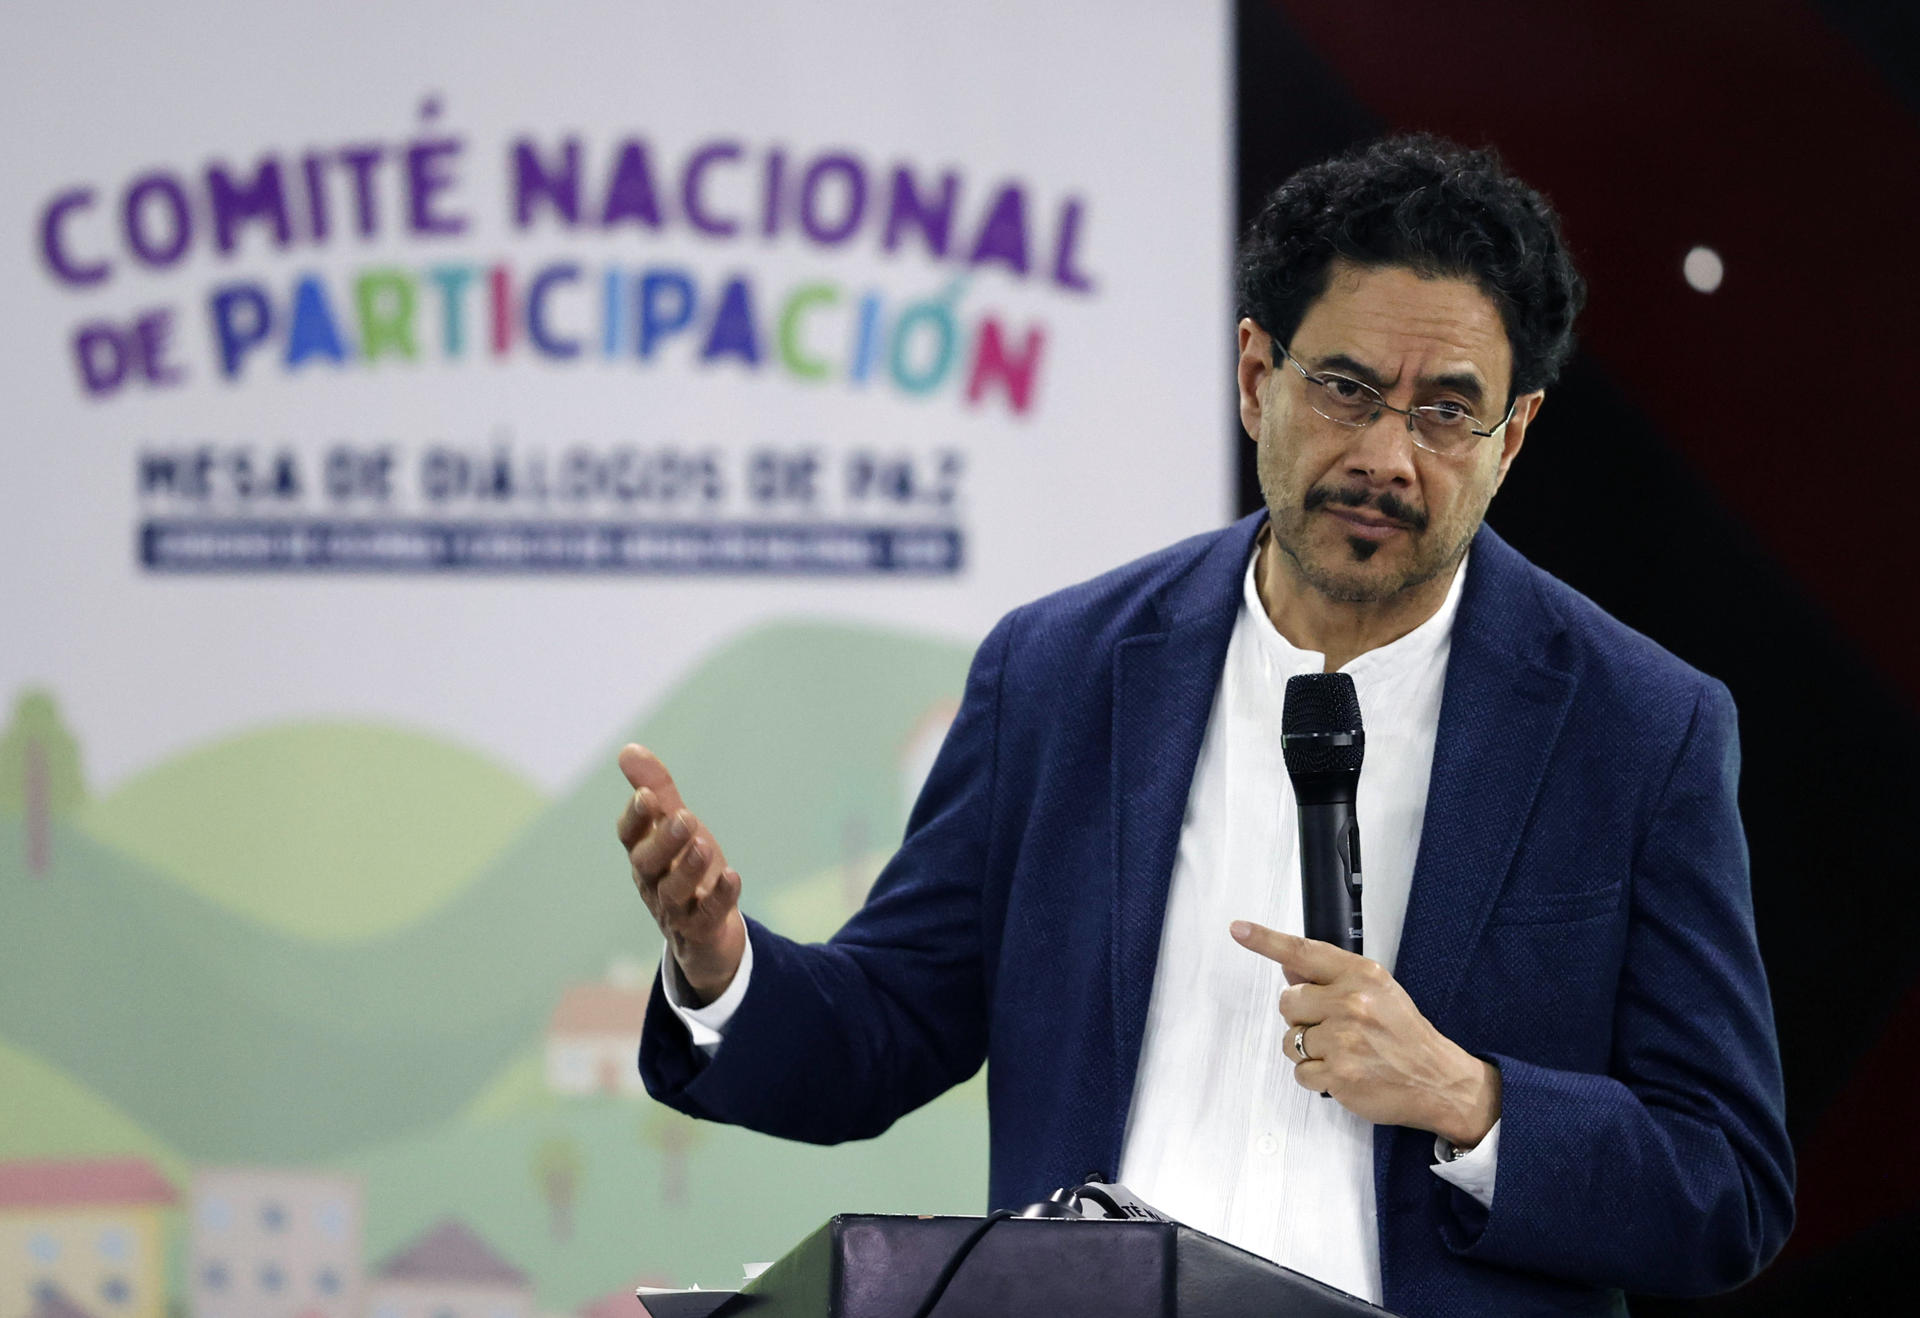 The senator of the Historical Pact coalition and Government negotiator with the ELN, Ivan Cepeda, speaks during the installation of the First National Meeting to design the participation of civil society in the peace process between the Colombian Government and the ELN guerrilla, in an event that has the presence of representatives of the guarantor and accompanying countries, the Episcopal Conference and the UN, in Bogota, Colombia, 06 October 2023. EFE/ Mauricio Duenas Castaneda